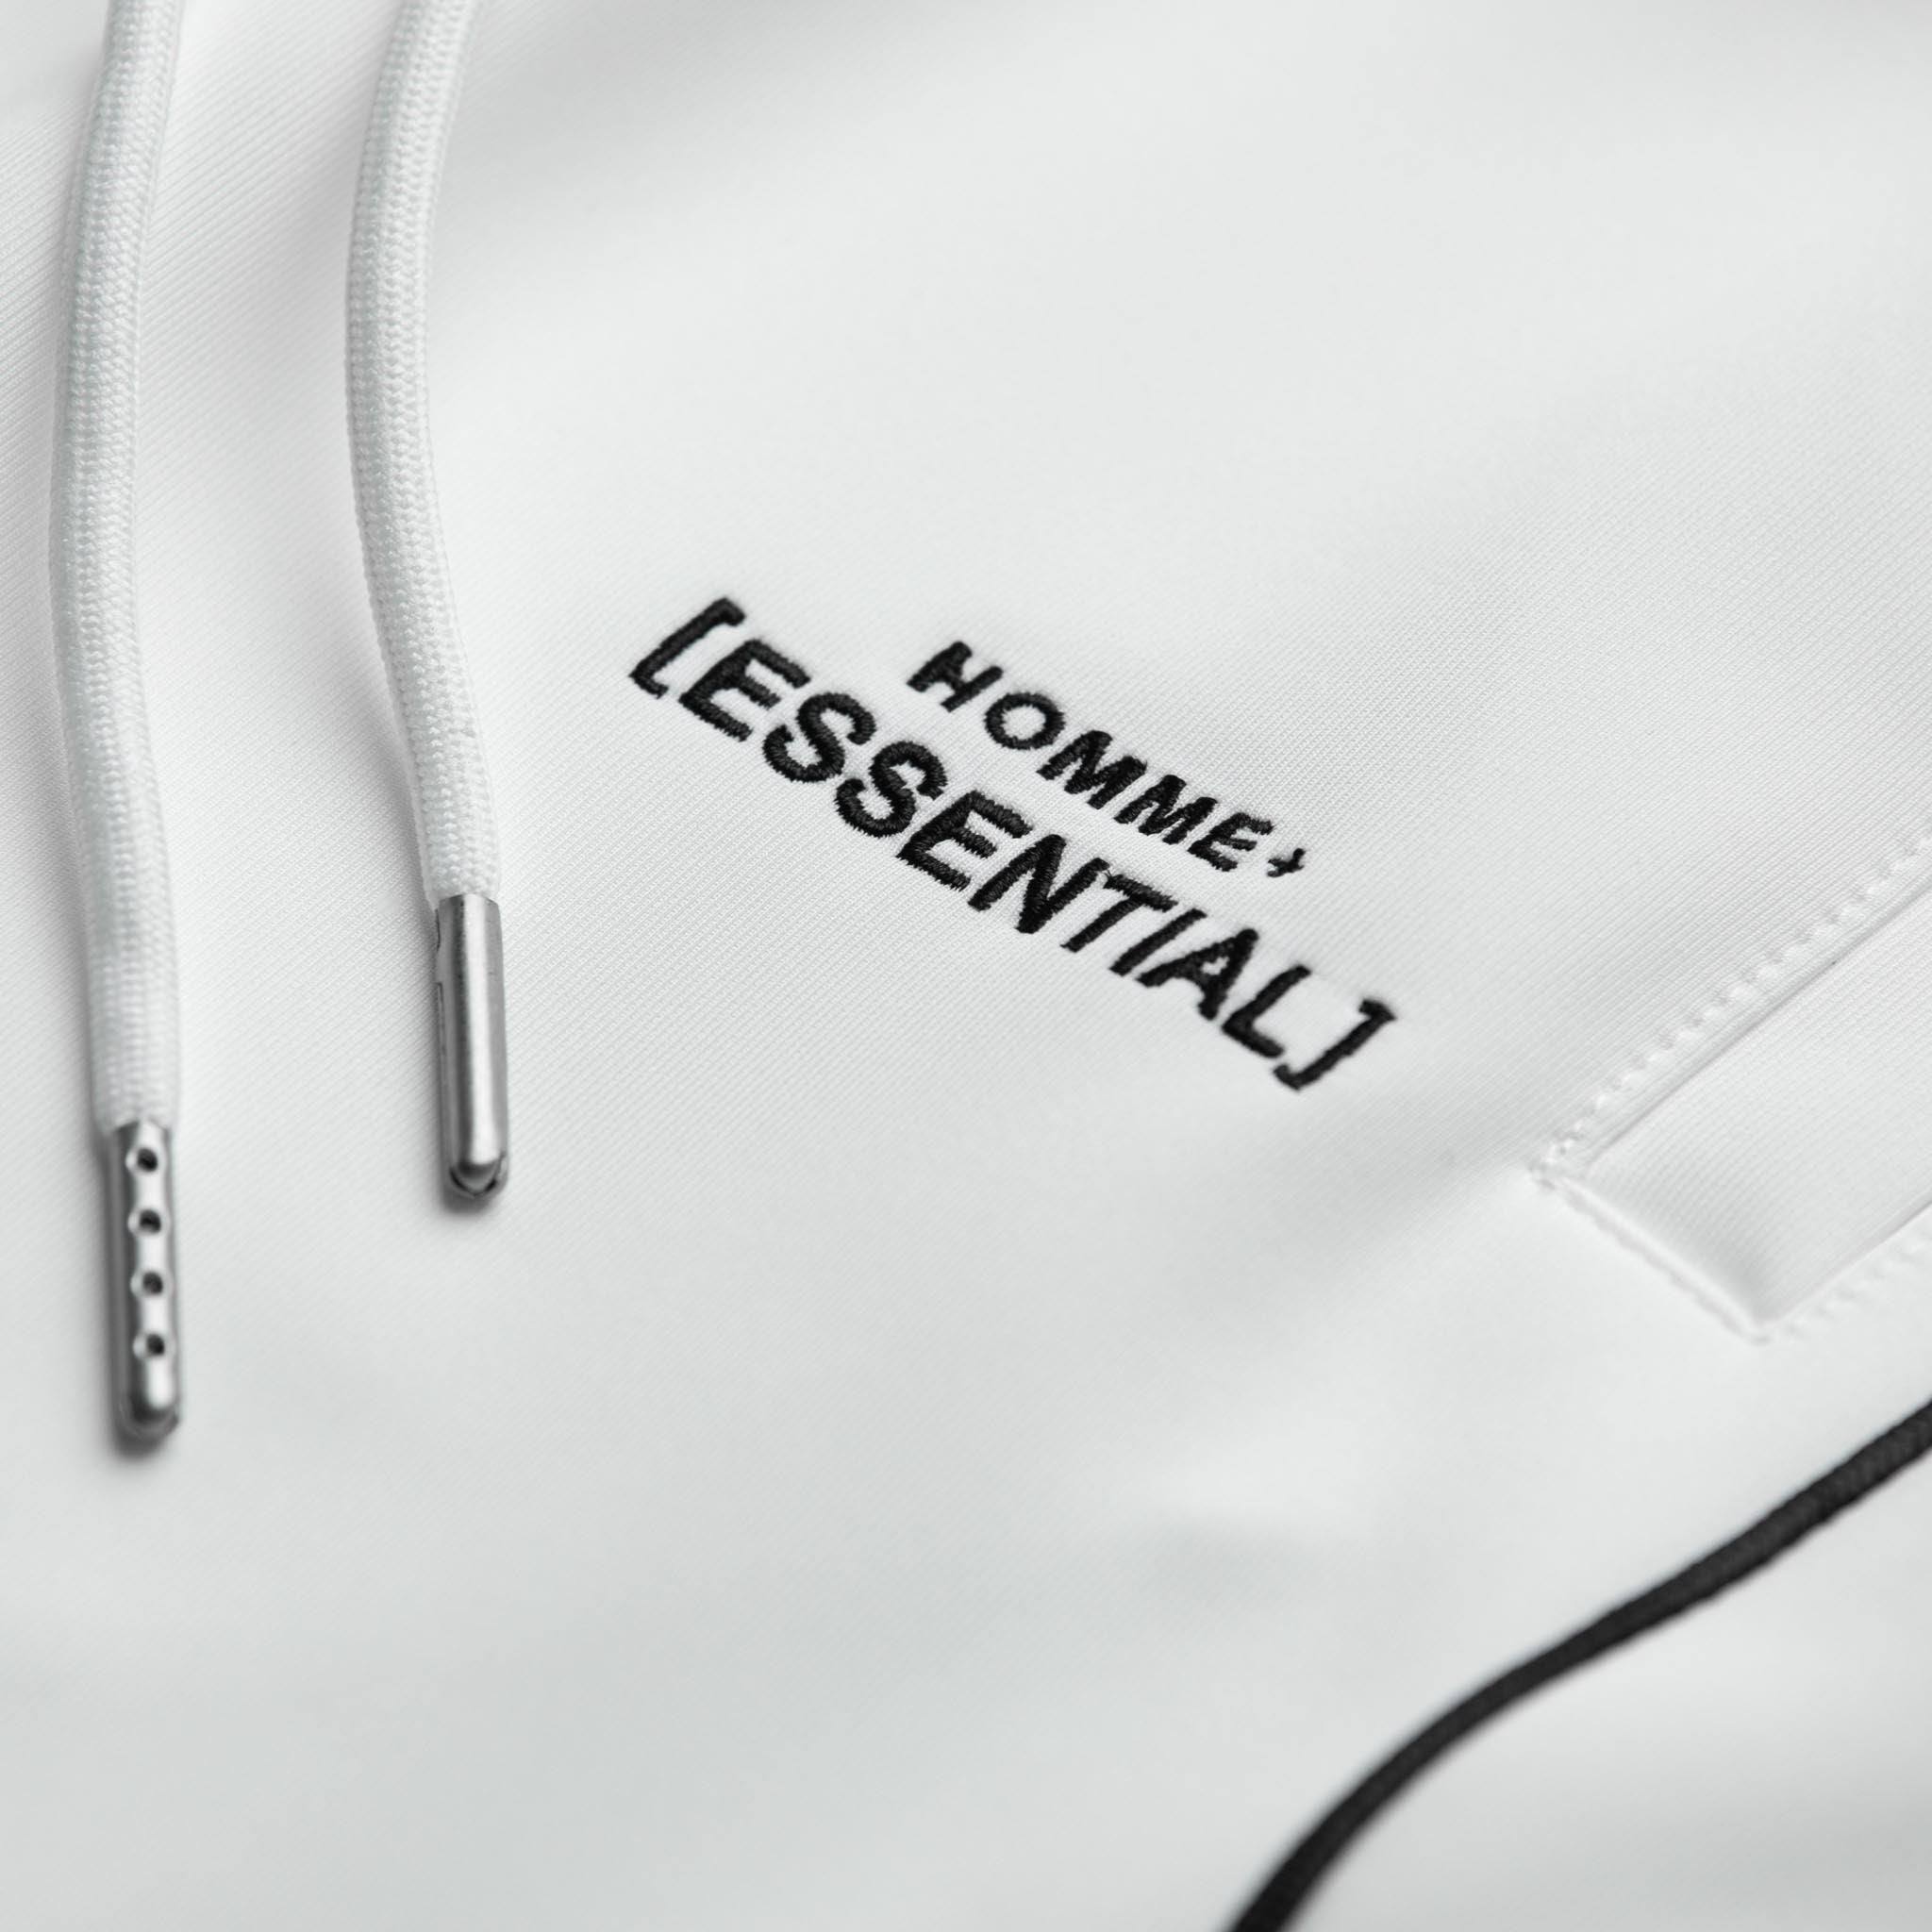 HOMME+ 'ESSENTIAL' Trackpants Off White